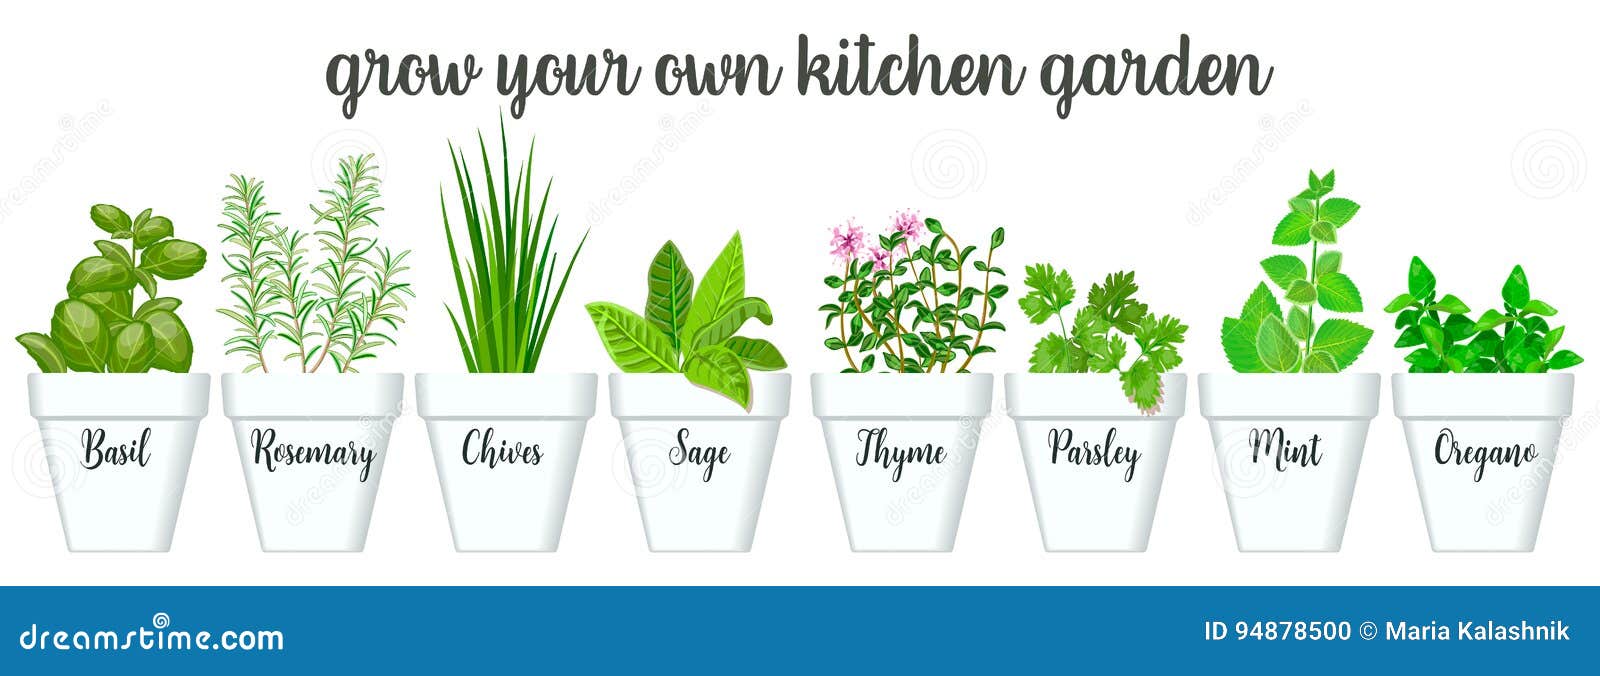 set of culinary herbs in white pots with labels. green growing basil, sage, rosemary, chives, thyme, parsley, mint, oregano